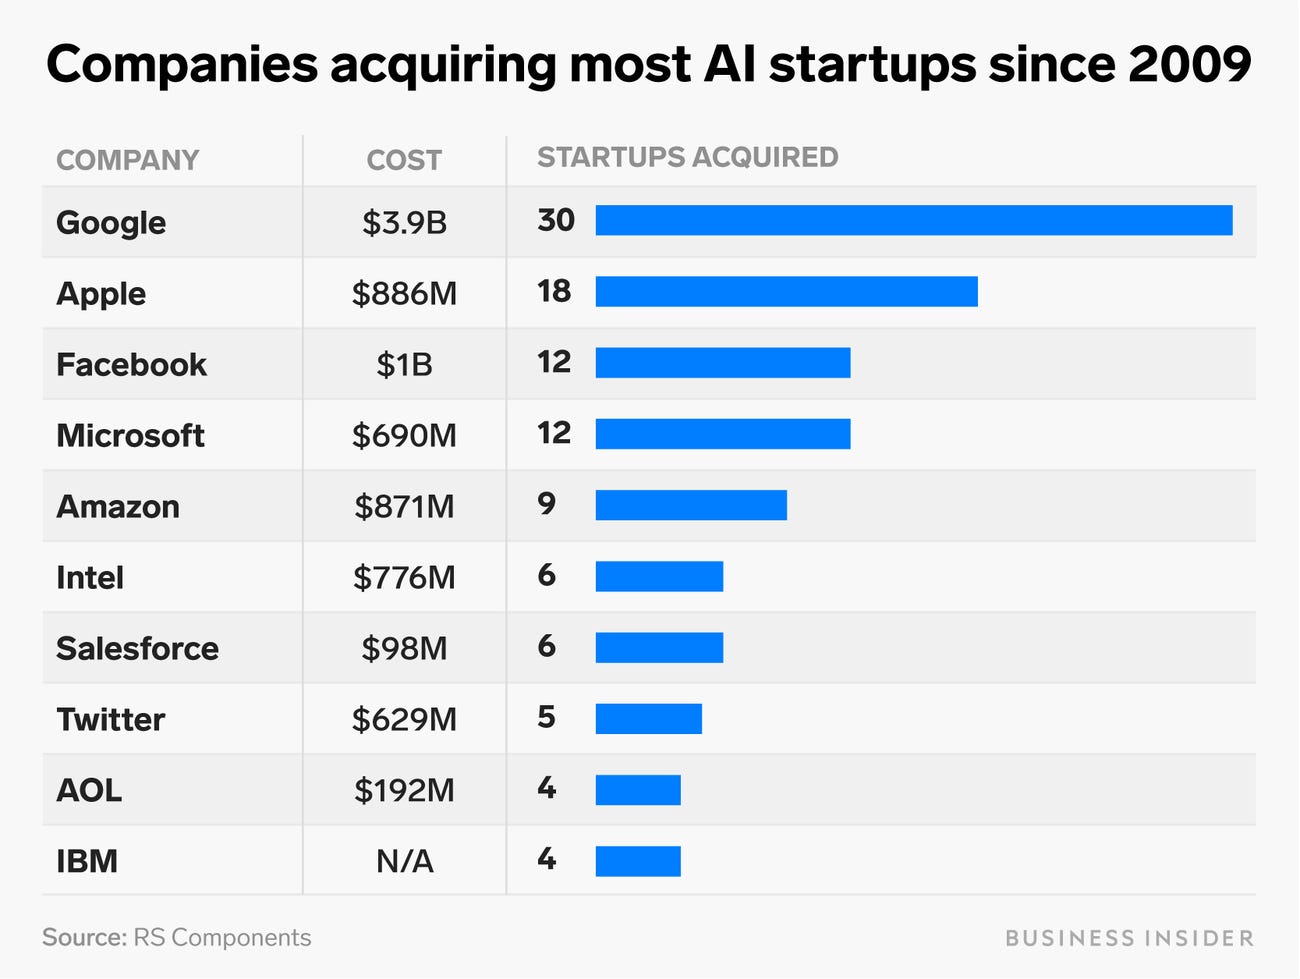 newsroom-post-the-ai-startup-industry-may-be-heading-for-consolidation-graphic.jpg